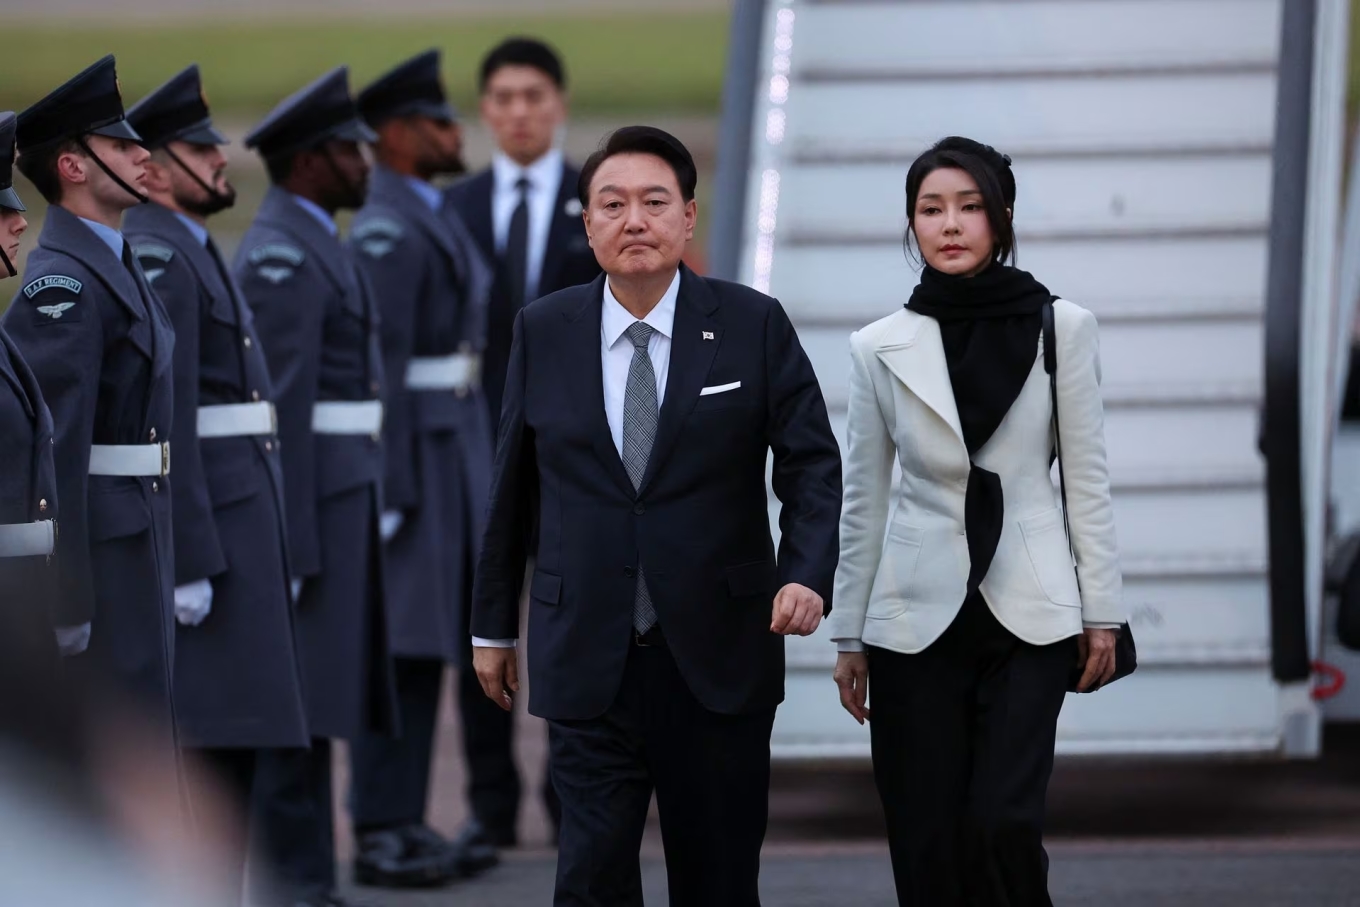 South Korean First Lady praised for style during state visit to UK